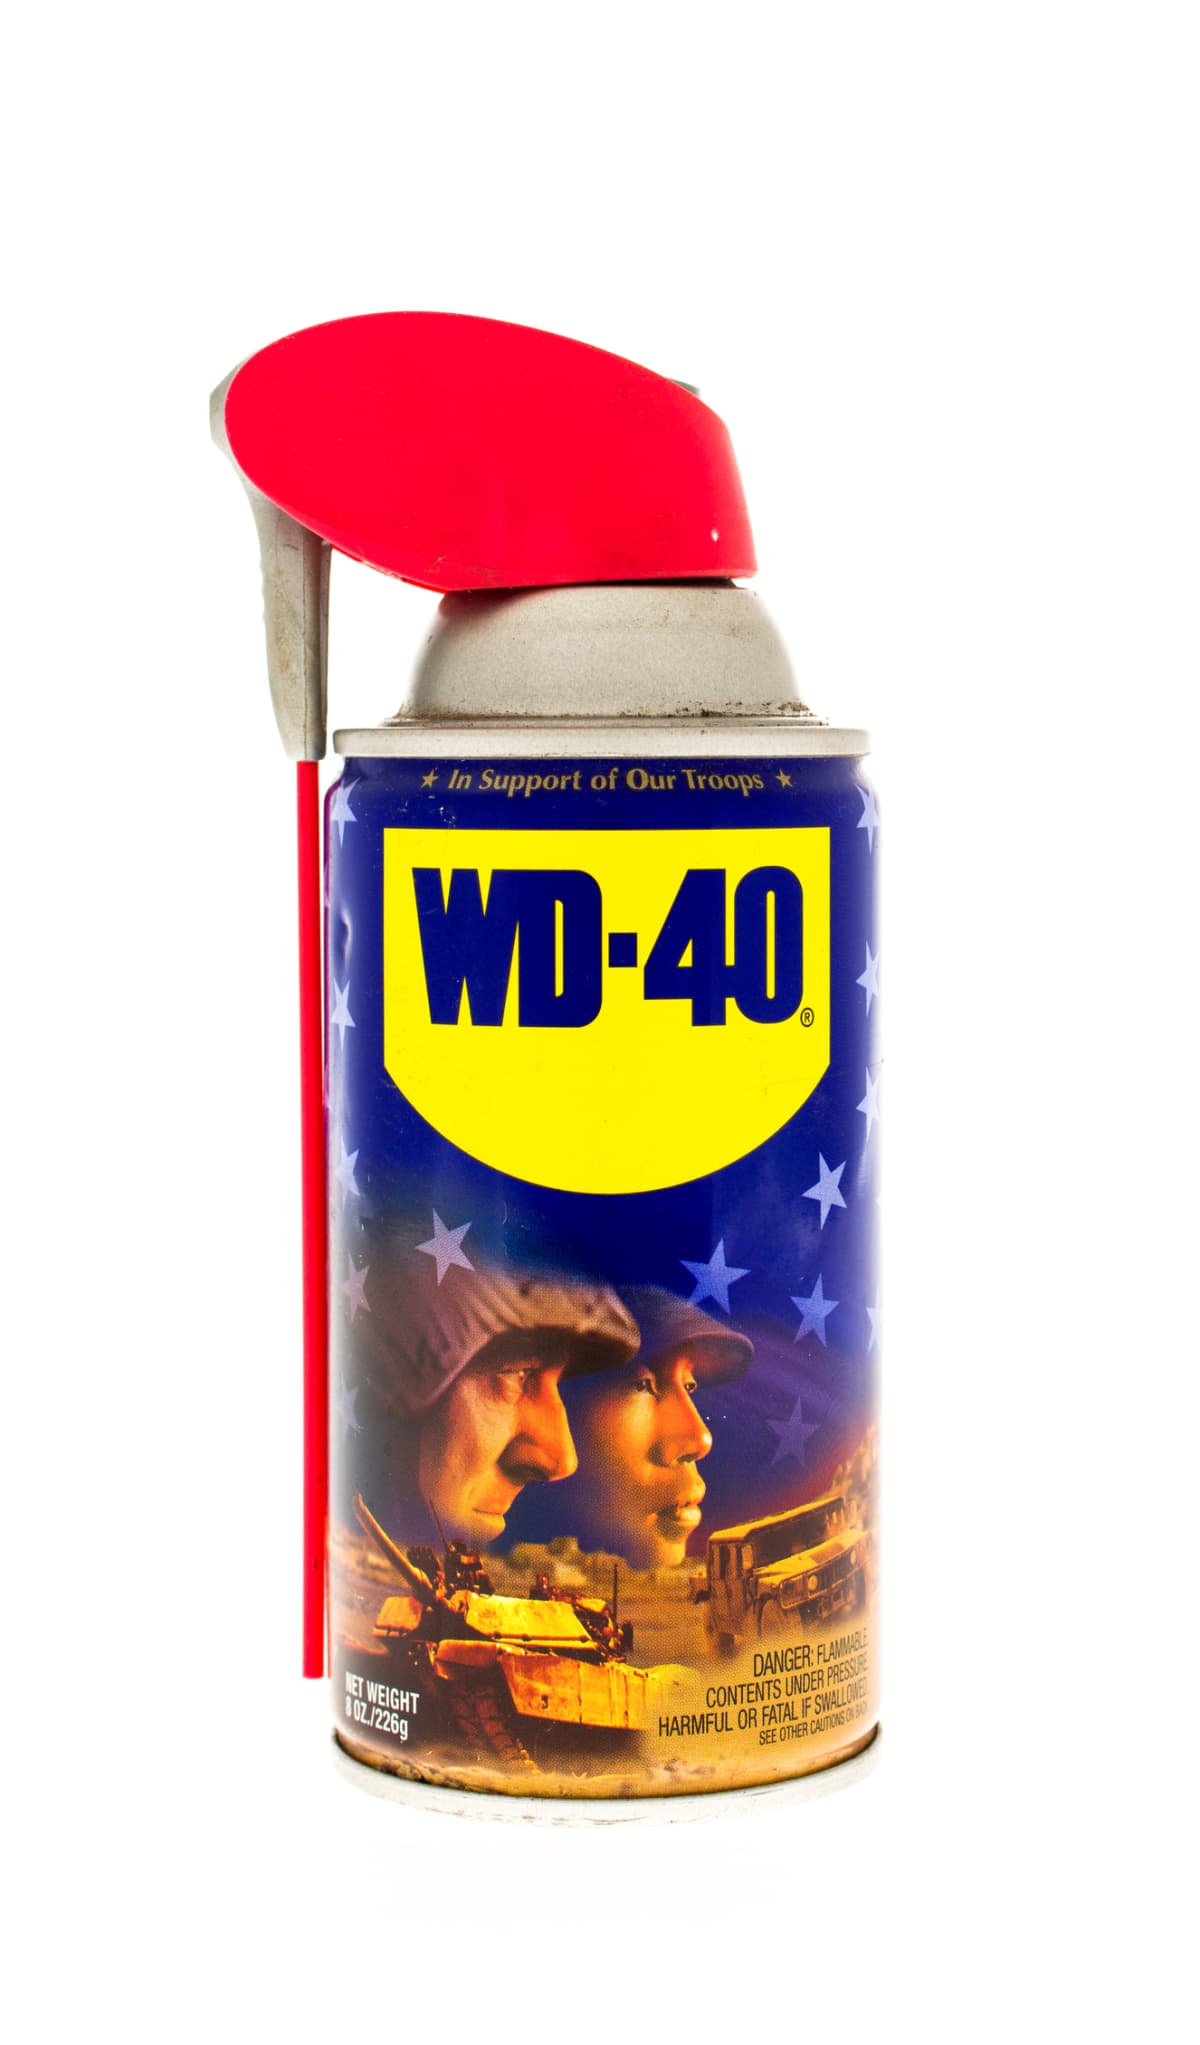 A can of WD-40 lubricating spray